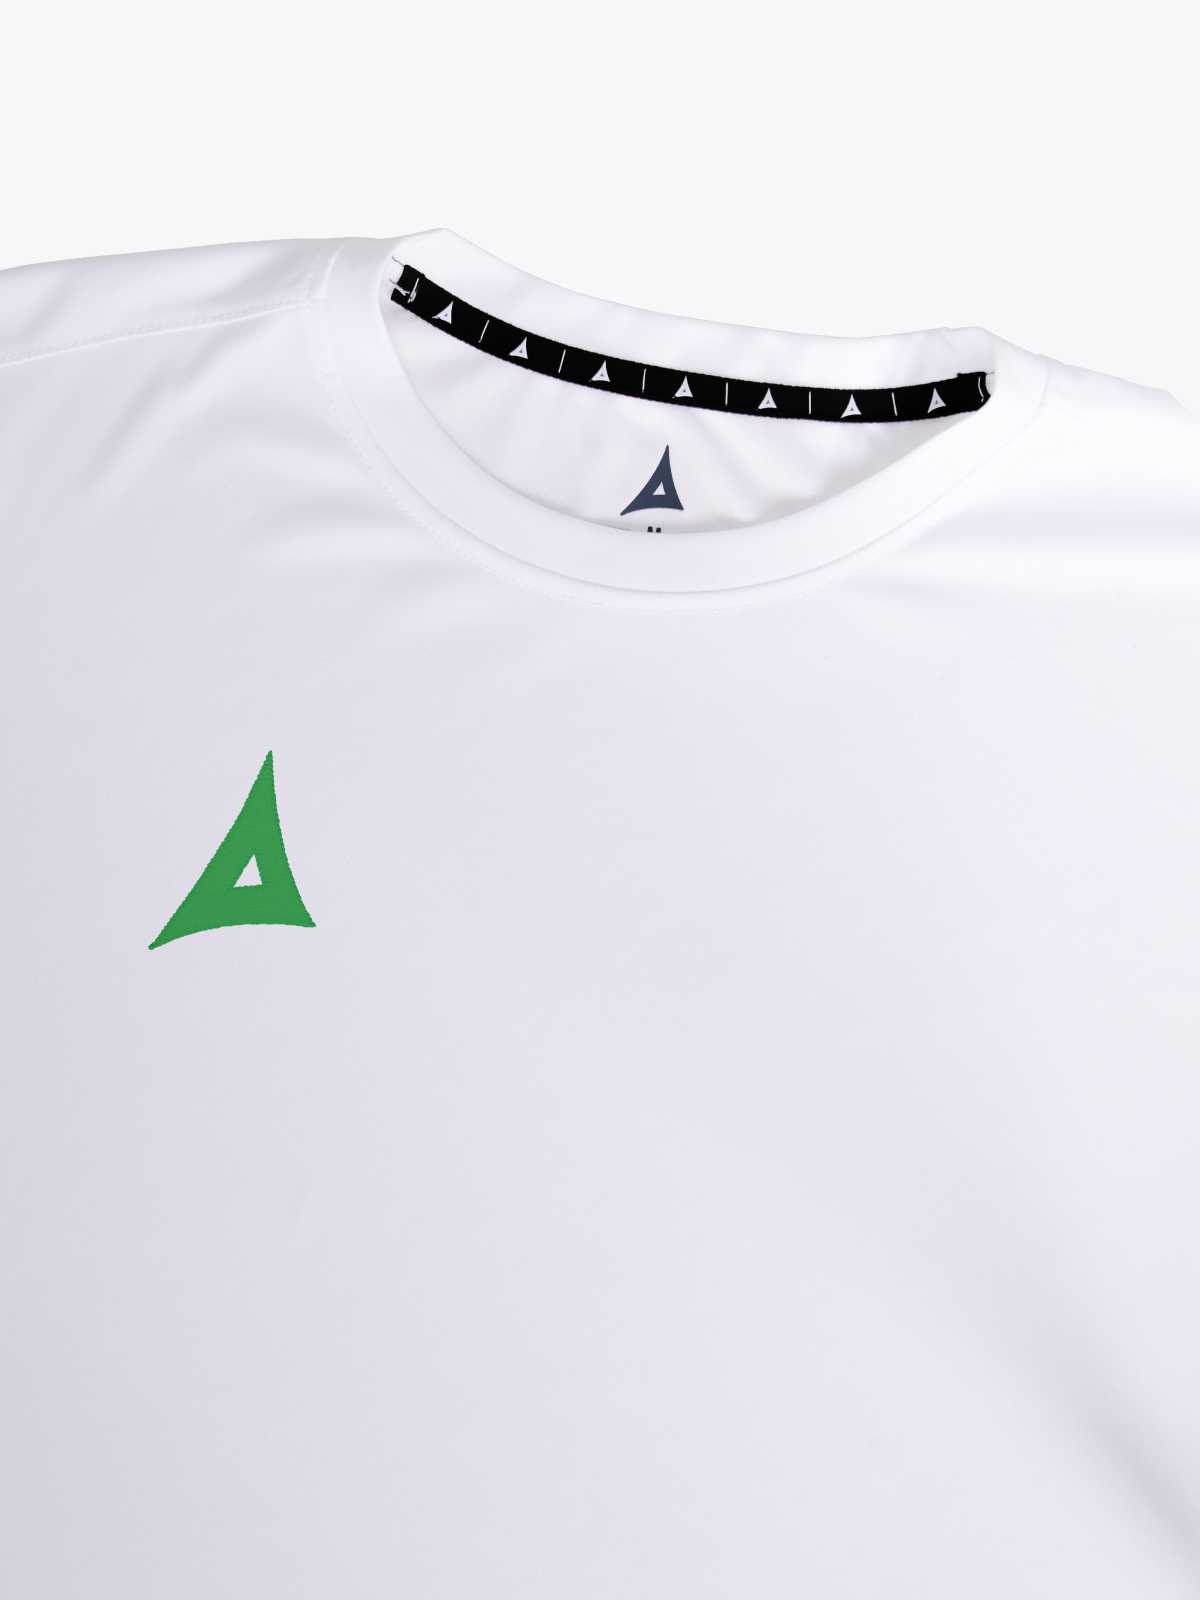 picture of focus 2 classic jersey - white/green